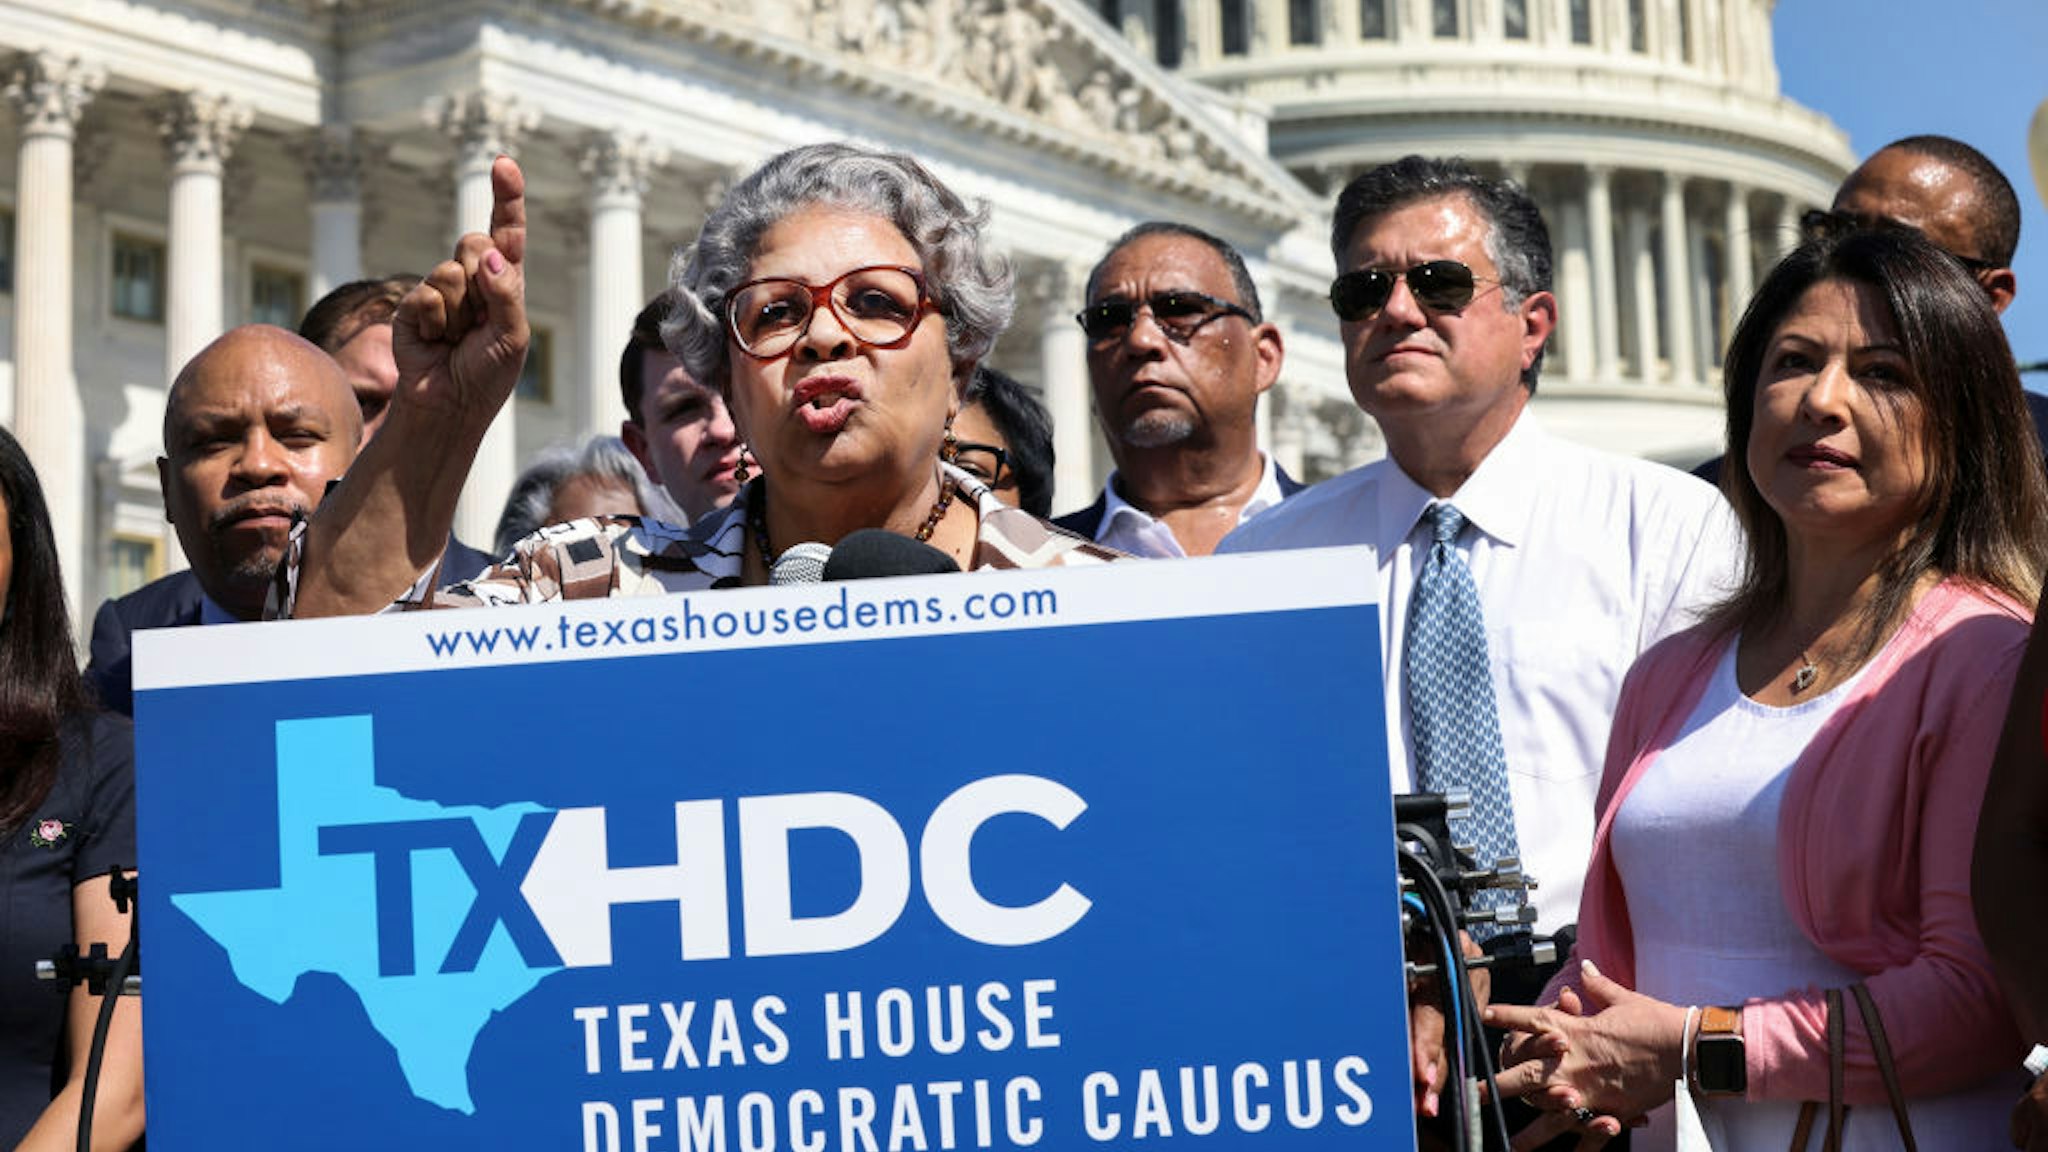 Texas House Democrats Speak On Their Decision To Break Quorum At State Capitol And Come To DC